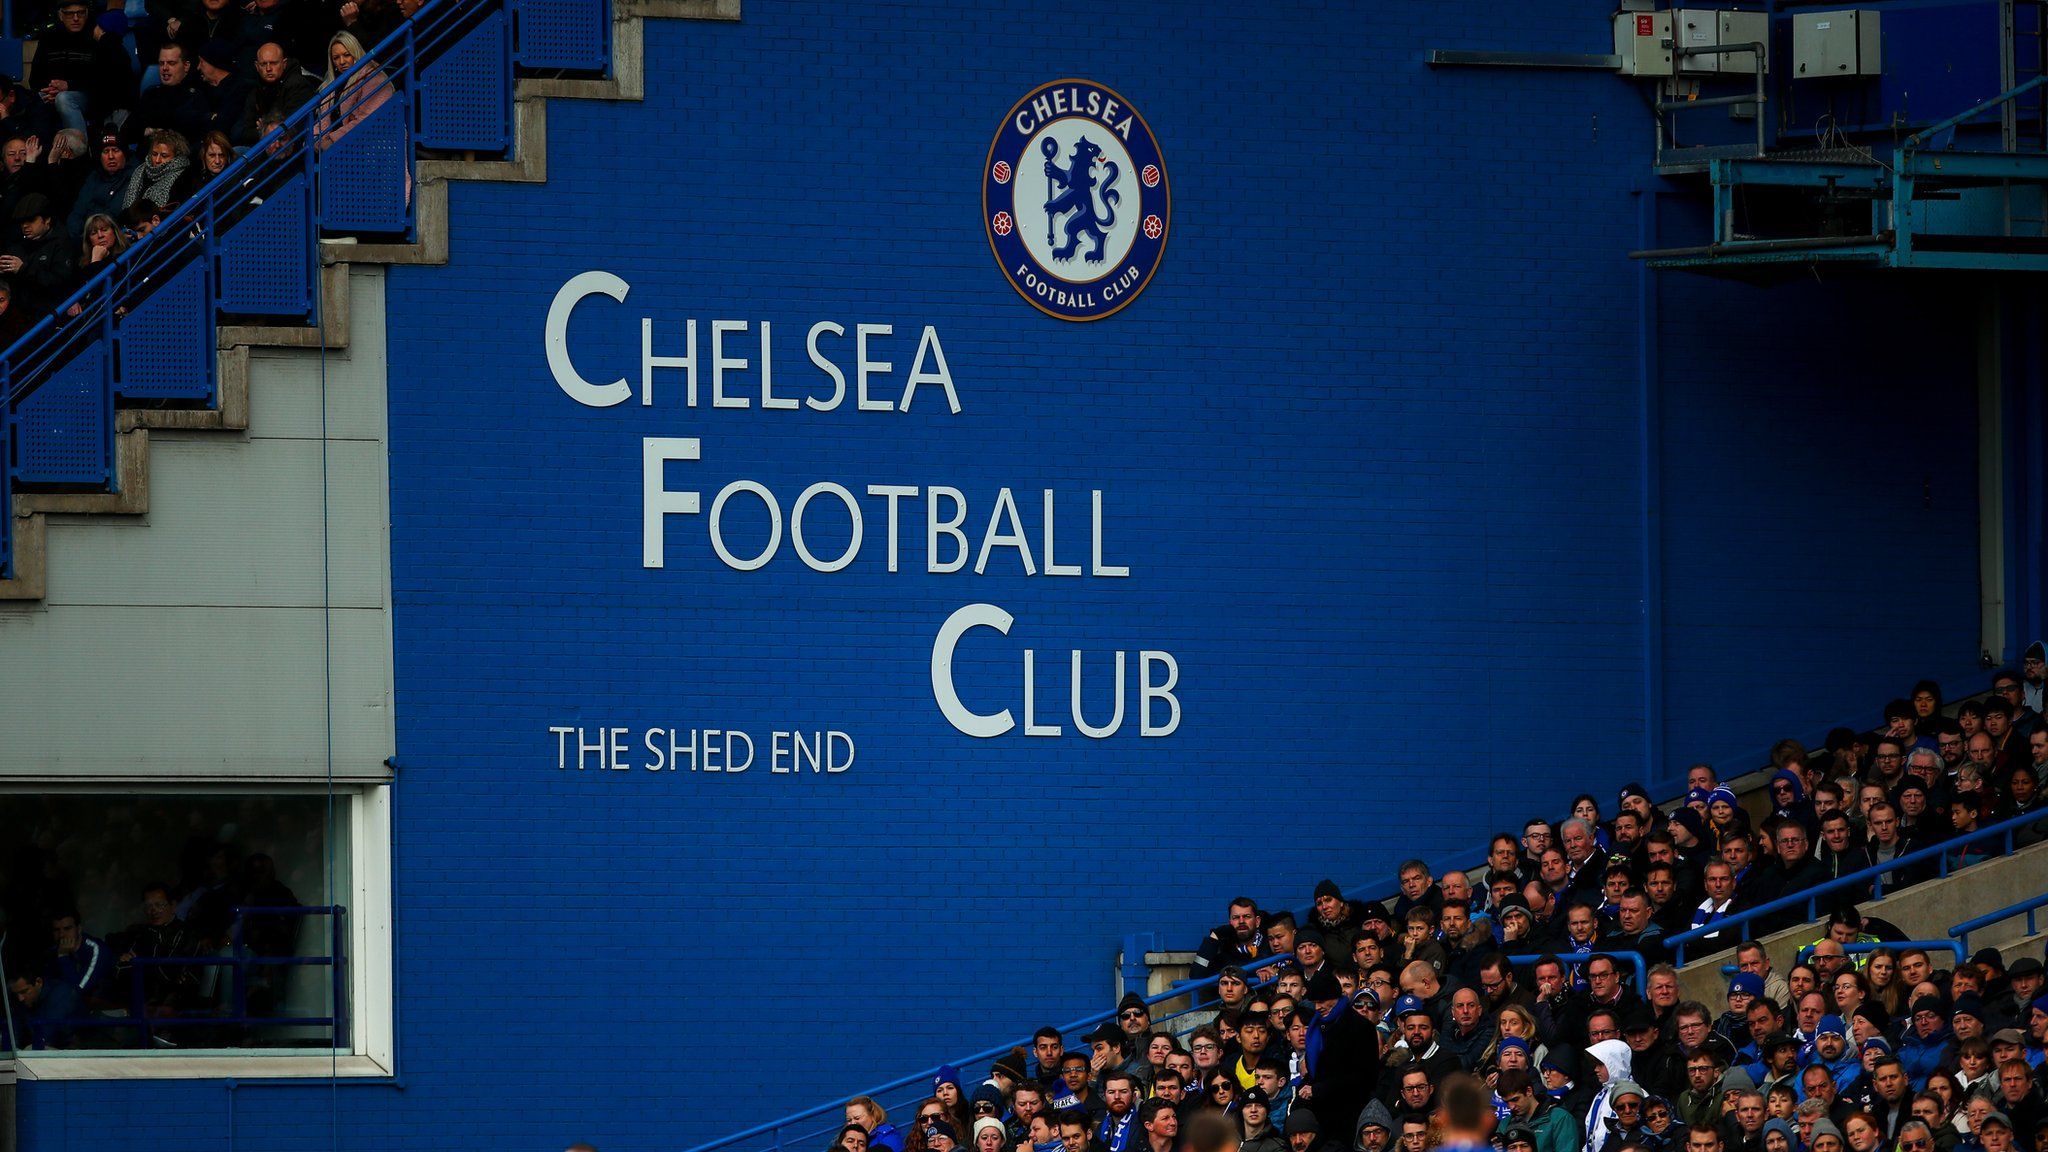 The Shed End at Stamford Bridge